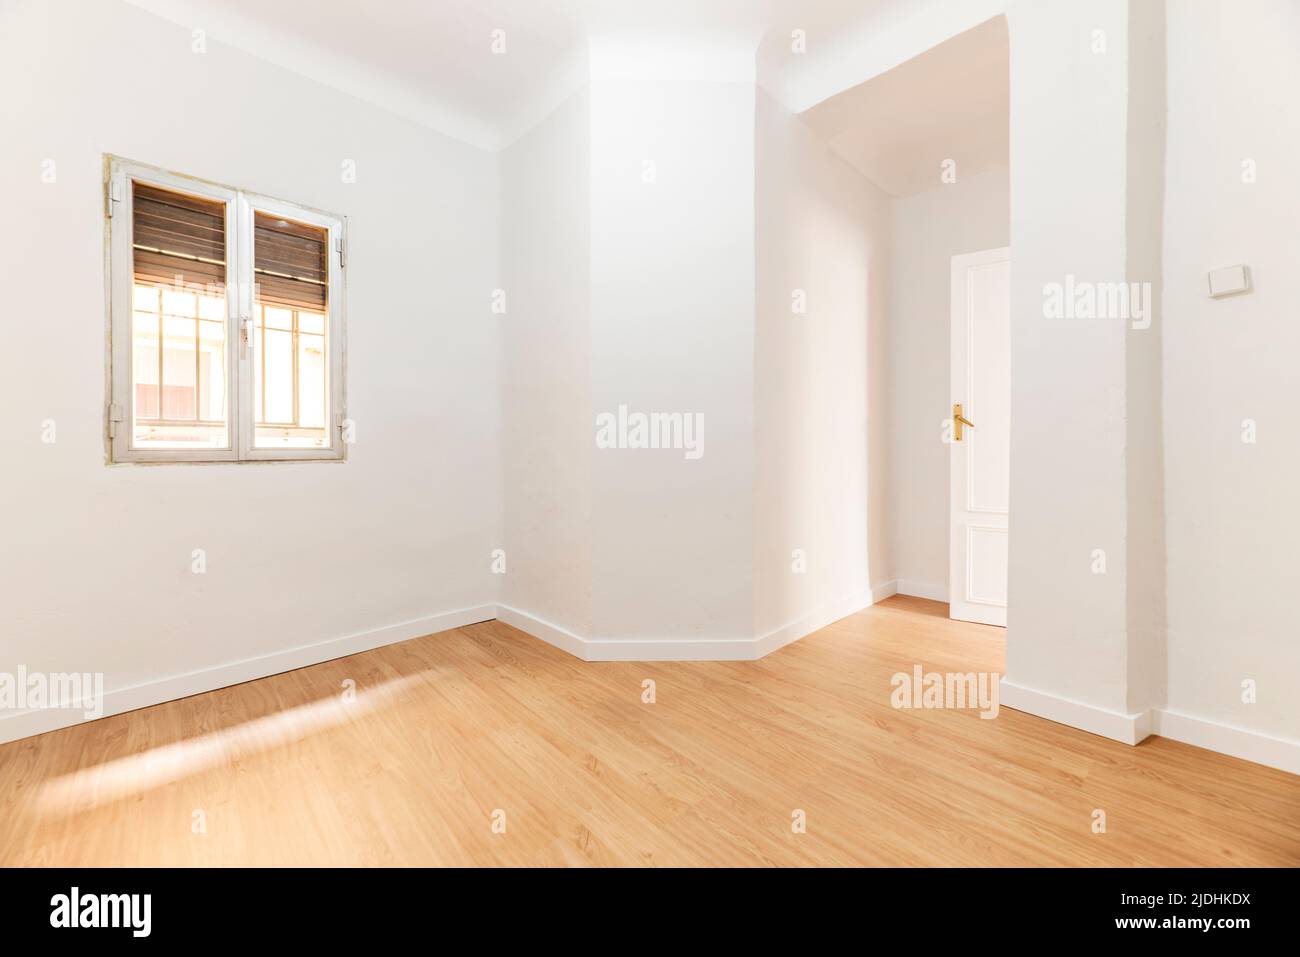 Empty room with oak parquet floor, white painted walls and aluminum windows Stock Photo